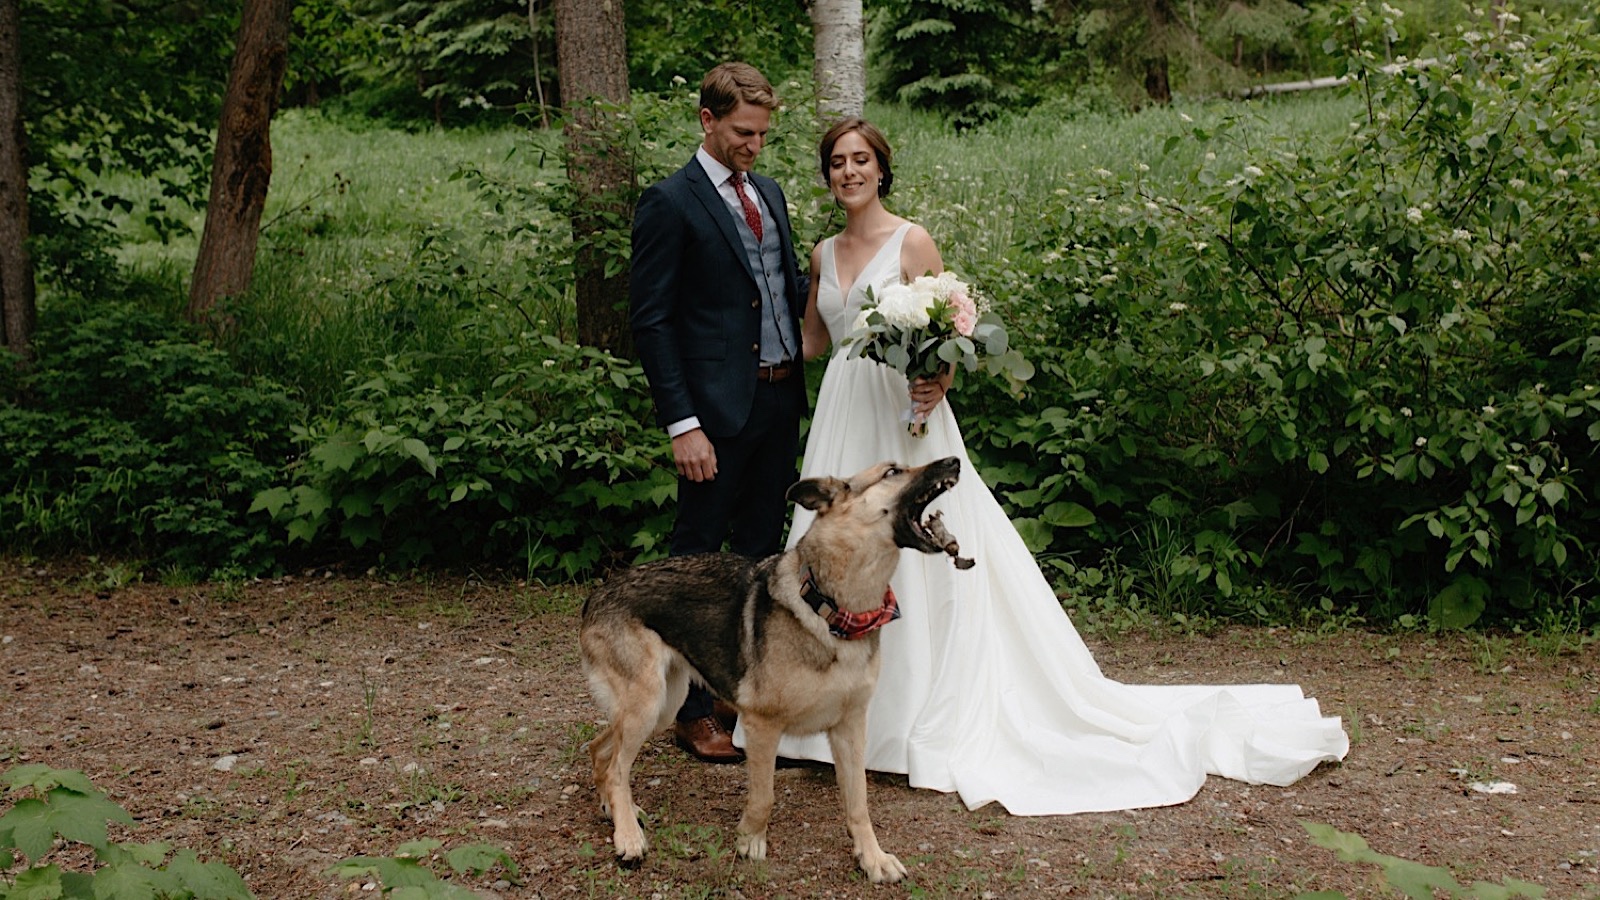 German shepherd catching a stick in front of his owners getting married